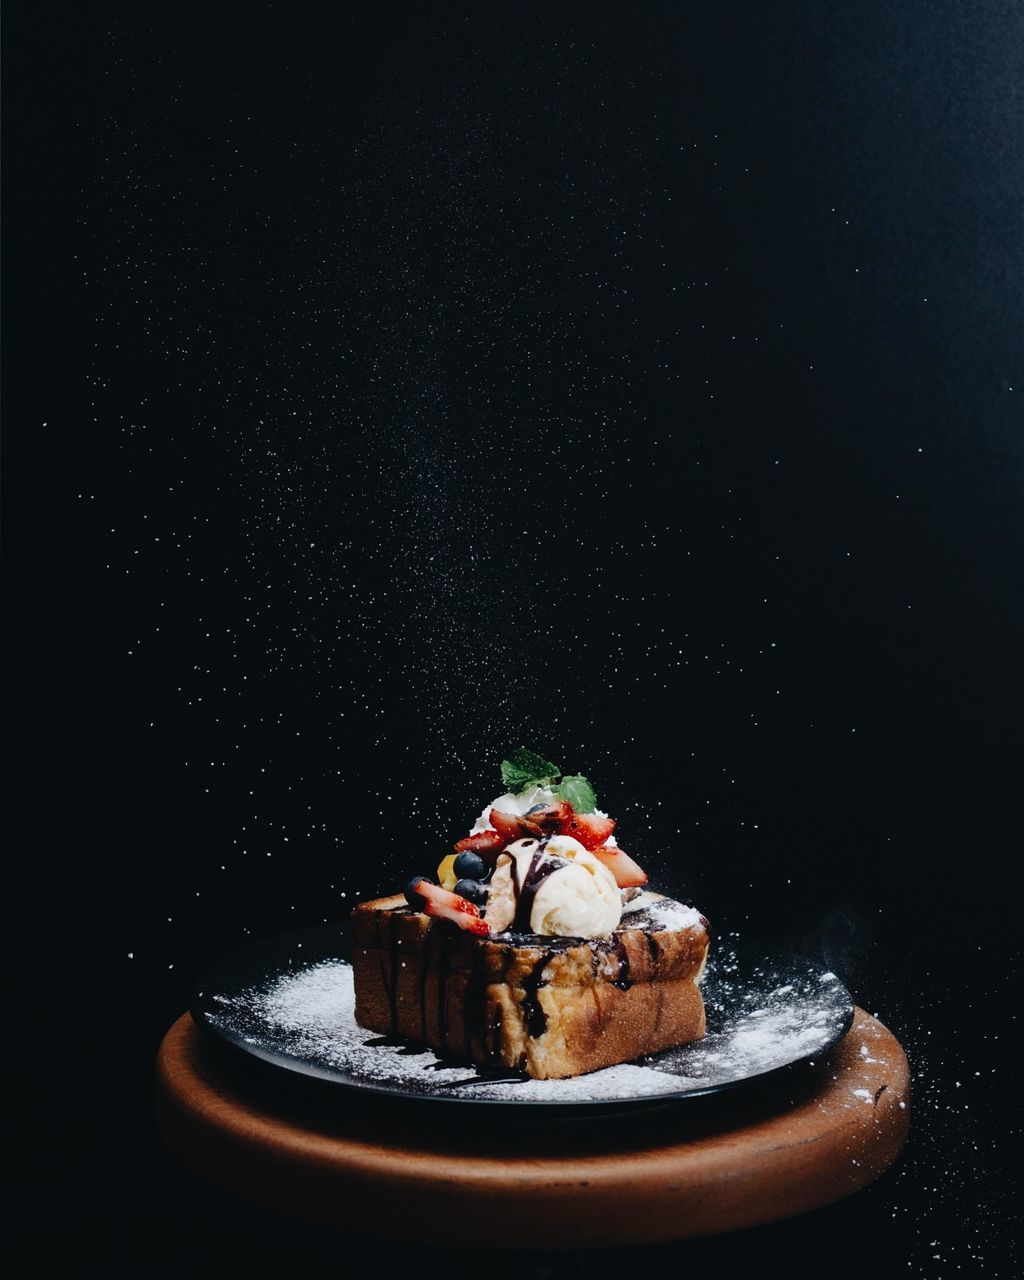 food and drink, food, sweet food, sweet, dessert, freshness, still life, indulgence, baked, plate, ready-to-eat, temptation, indoors, unhealthy eating, no people, cake, chocolate, studio shot, serving size, berry fruit, black background, snack, crockery